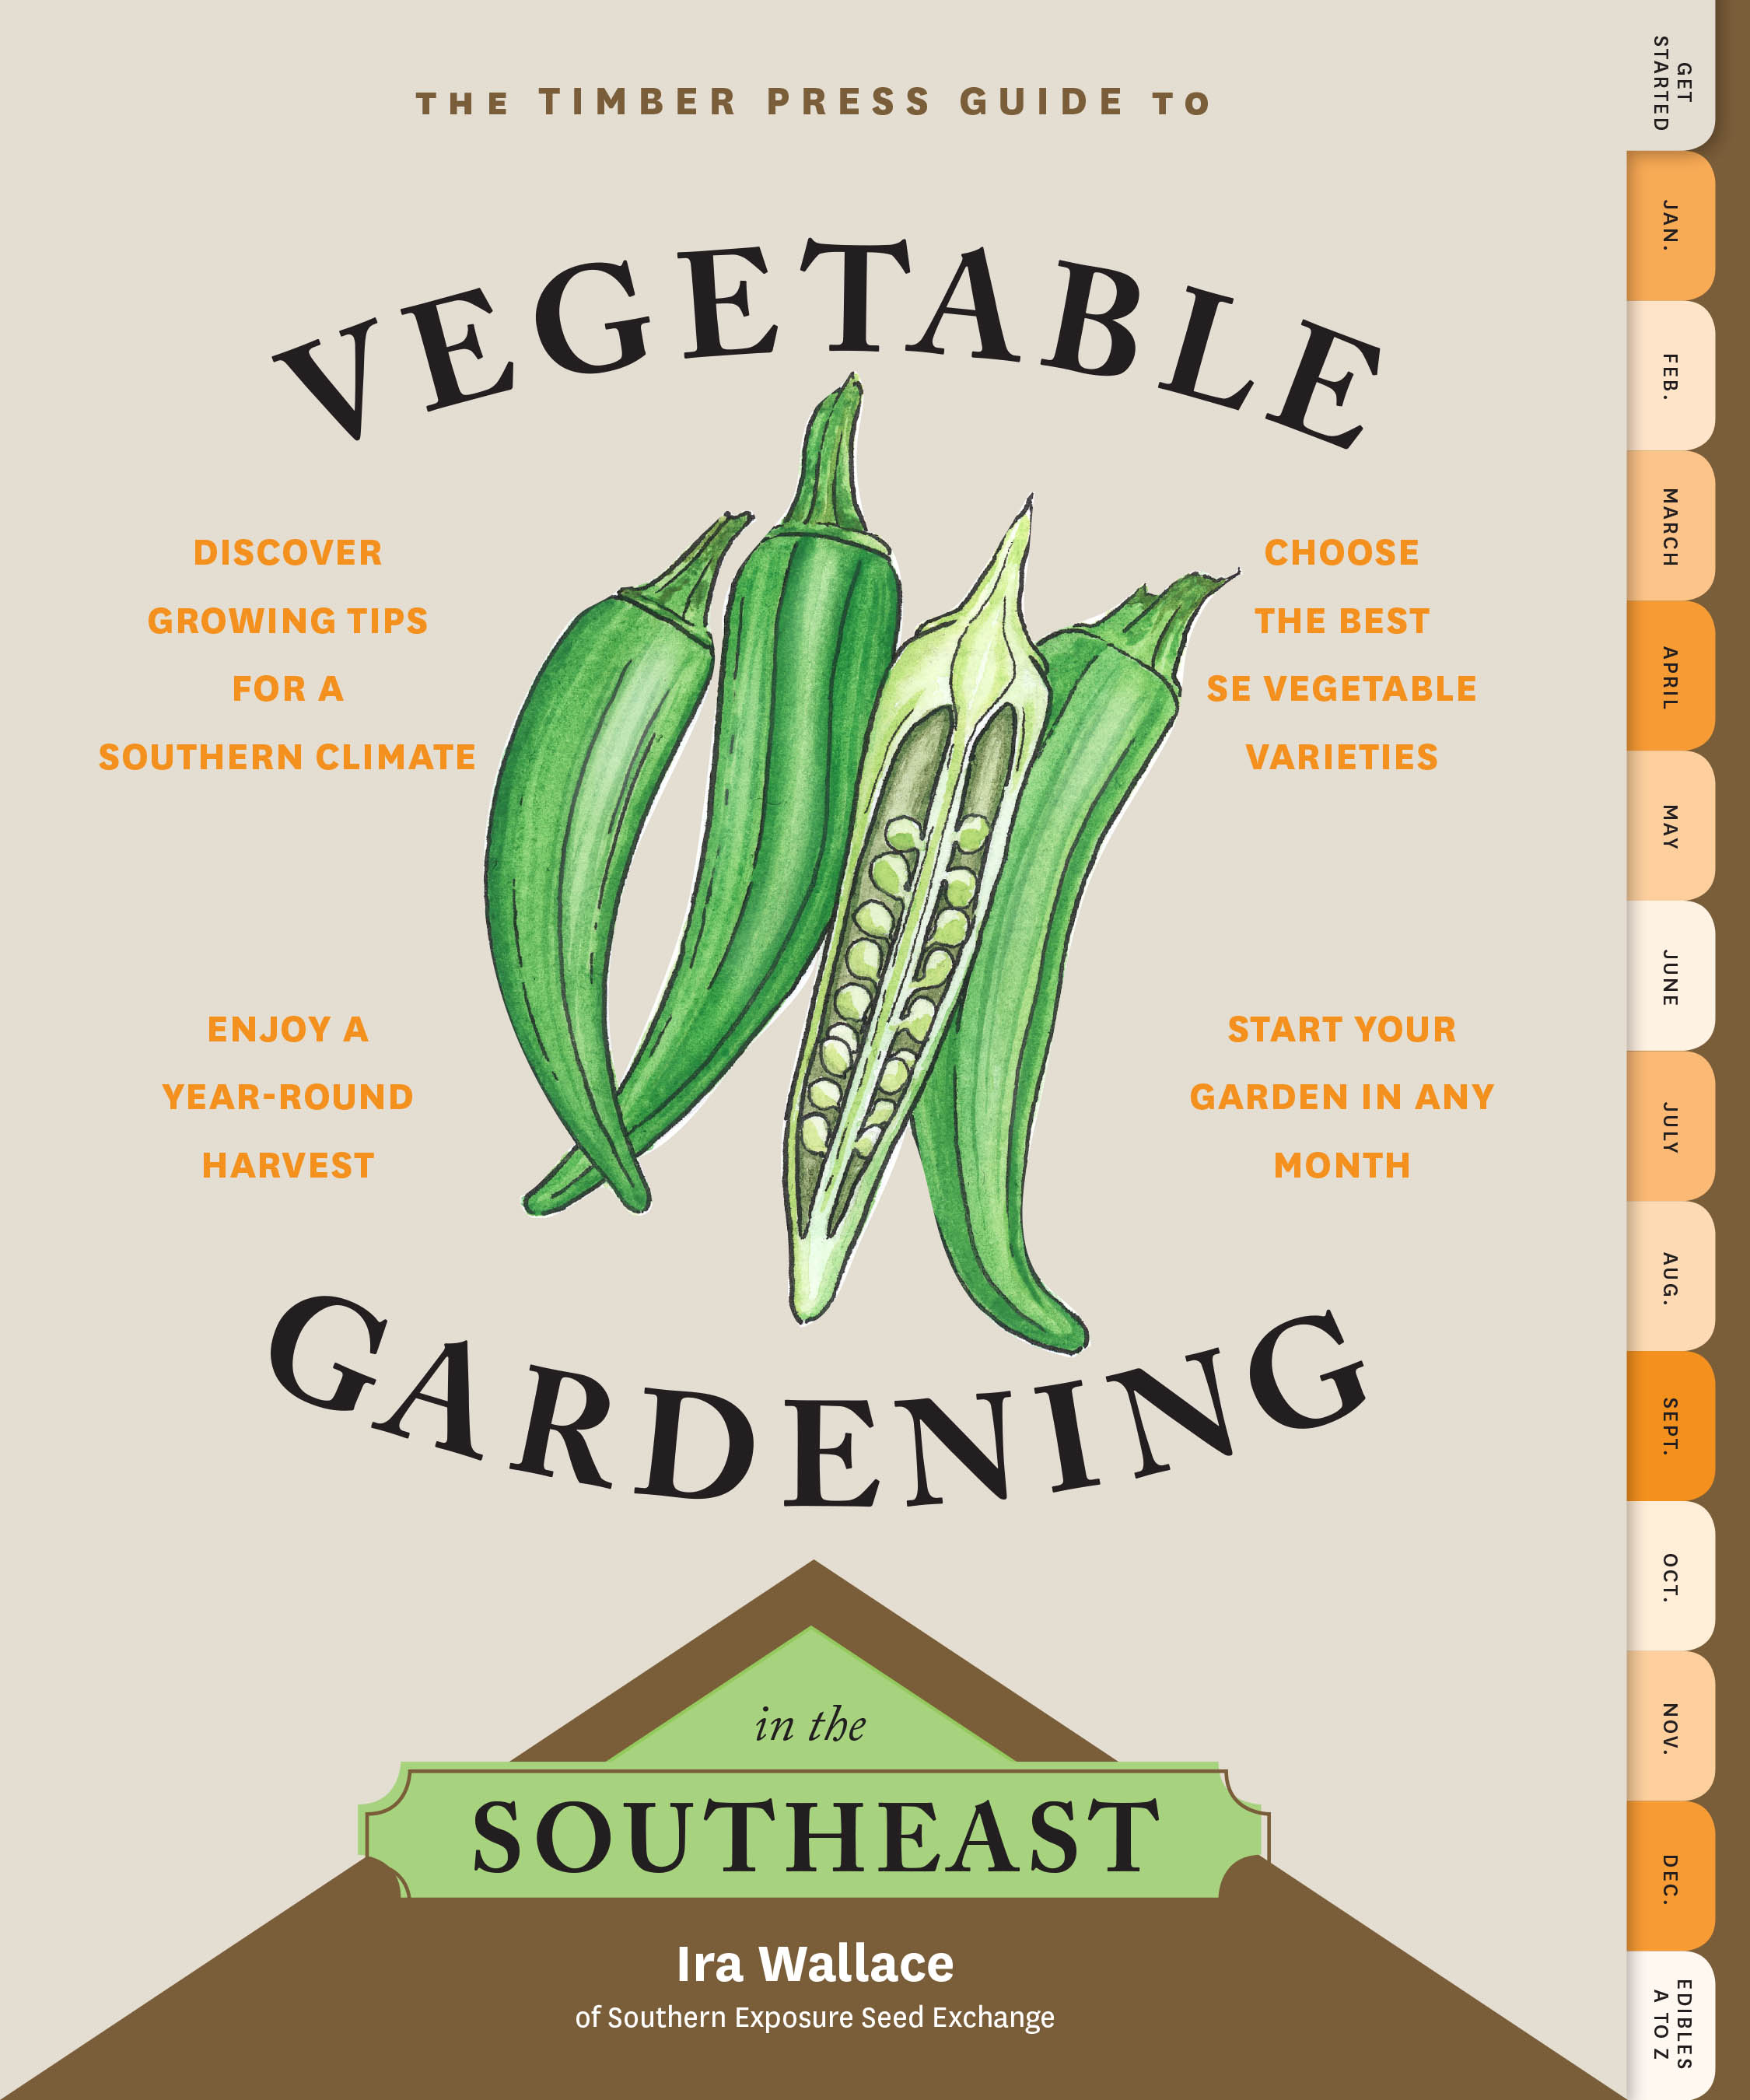 https://www.southernexposure.com/media/products/originals/book-vegetable-gardening-in-the-southeast-6e4dbafddedb46eac5ba5a02885cbb1c.jpg